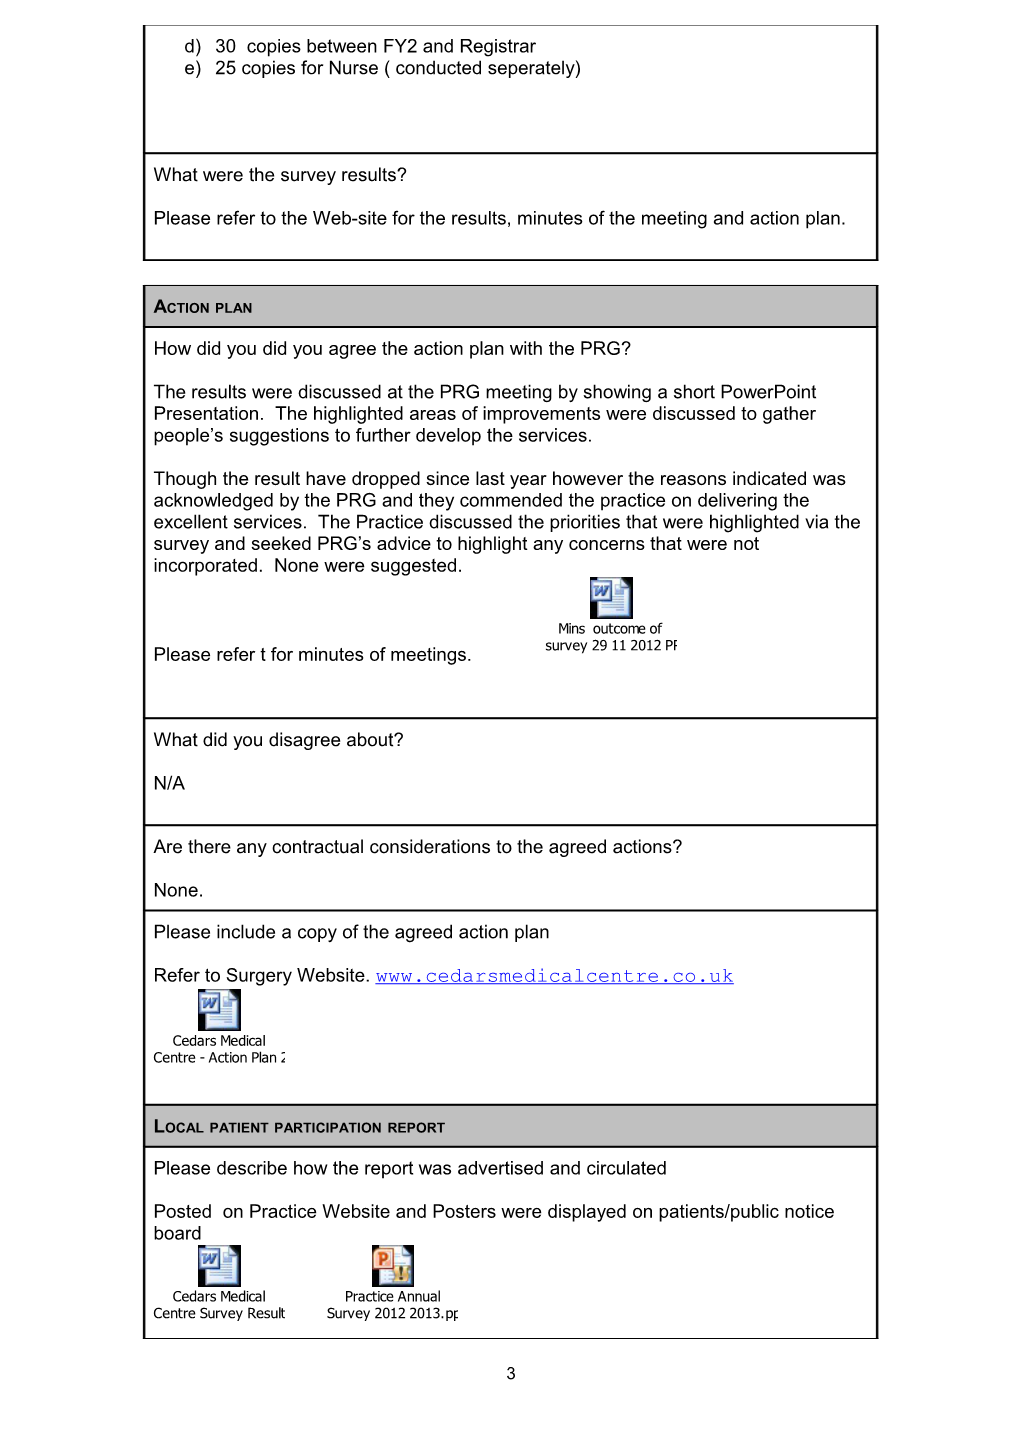 Template for Information to Be Included in the Patient Participation Report